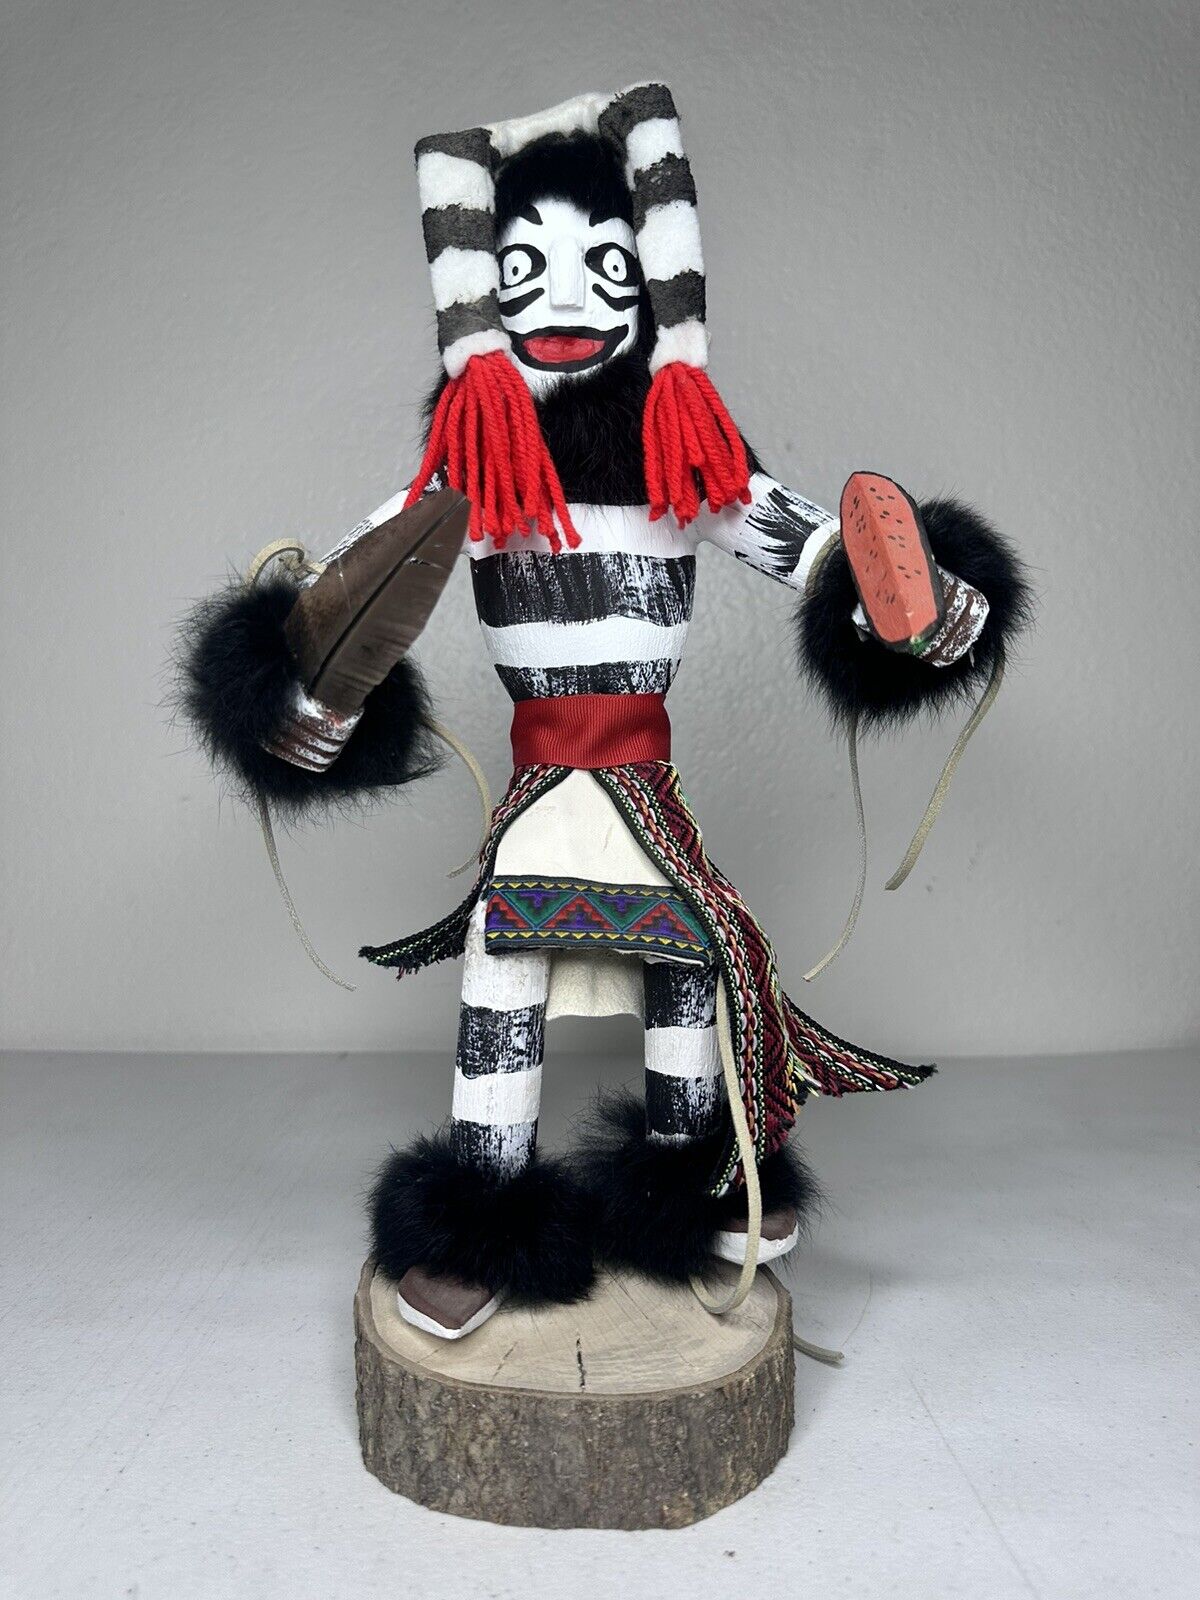 Authentic 15” Hano Clown Kachina Doll by Little Dove - Handcrafted Native Americ